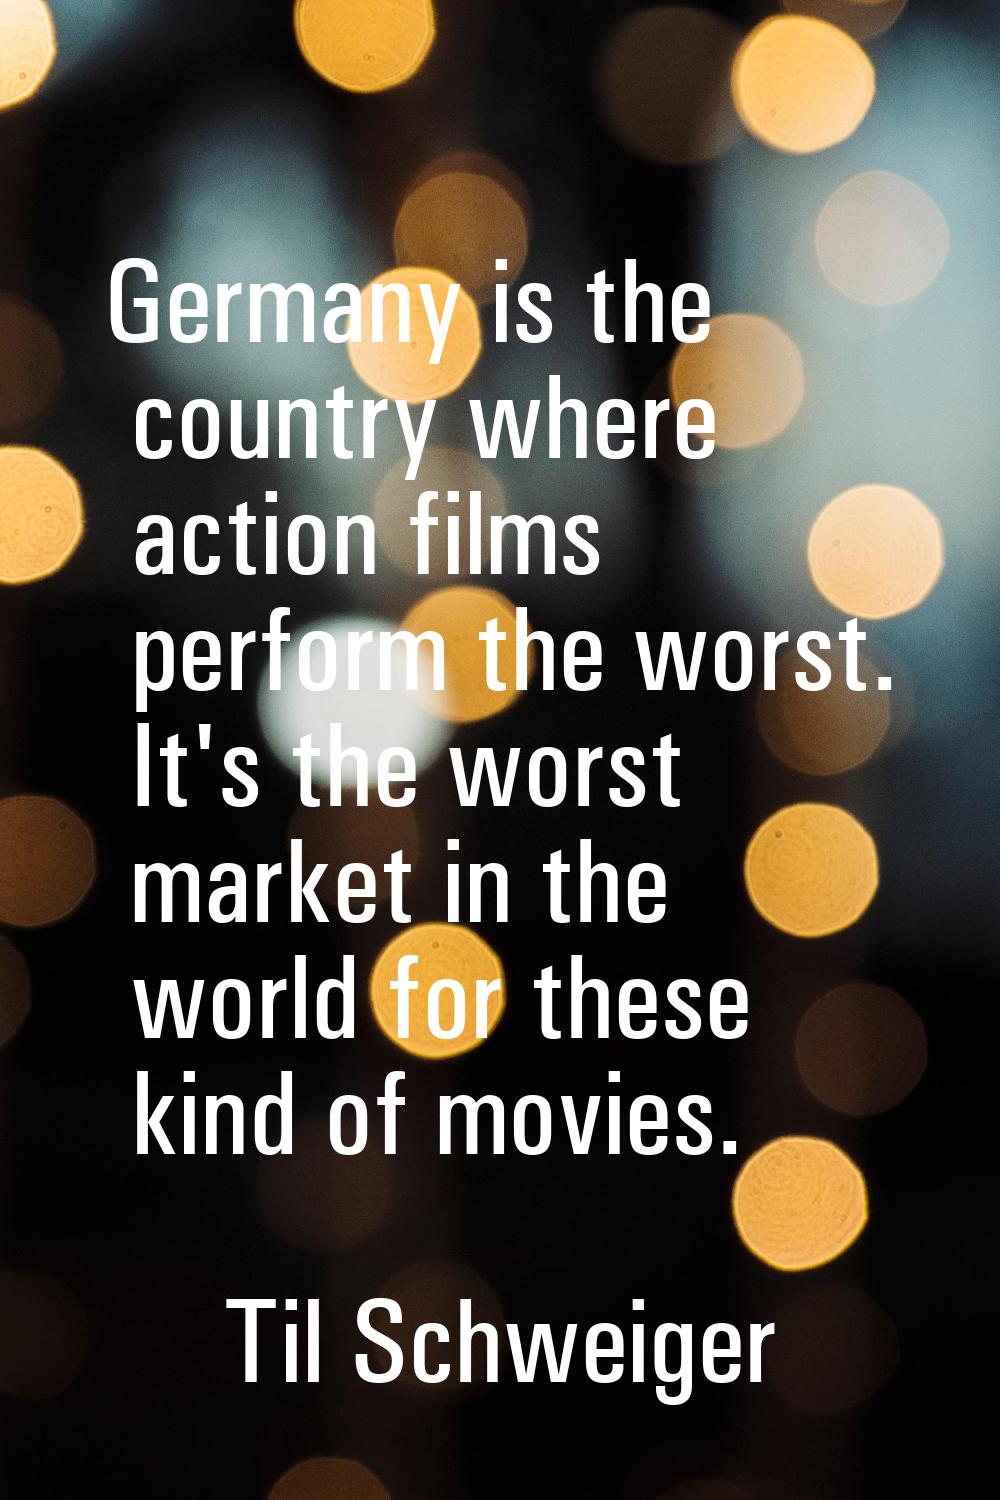 Germany is the country where action films perform the worst. It's the worst market in the world for